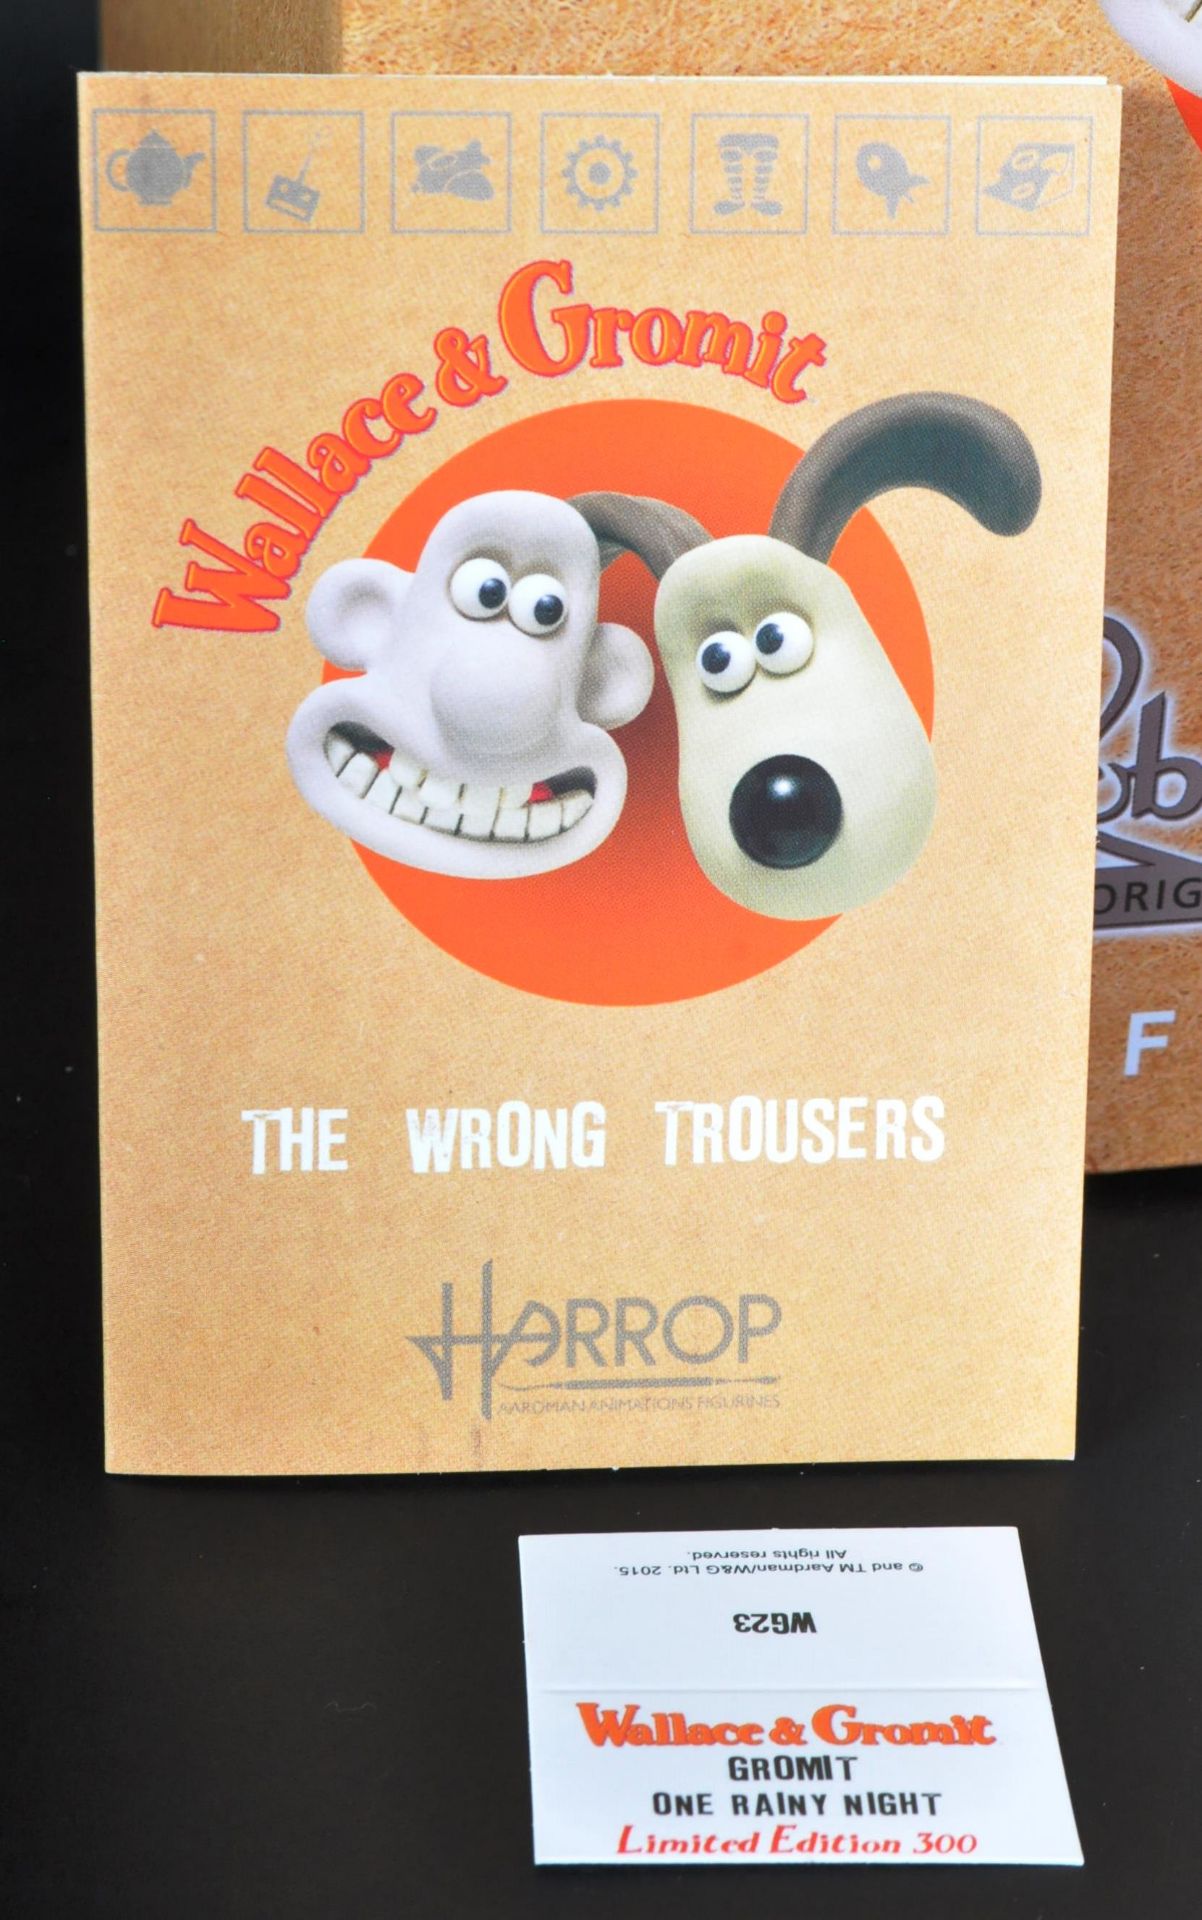 WALLACE & GROMIT - ROBERT HARROP - LIMITED EDITION FIGURINE - Image 6 of 6